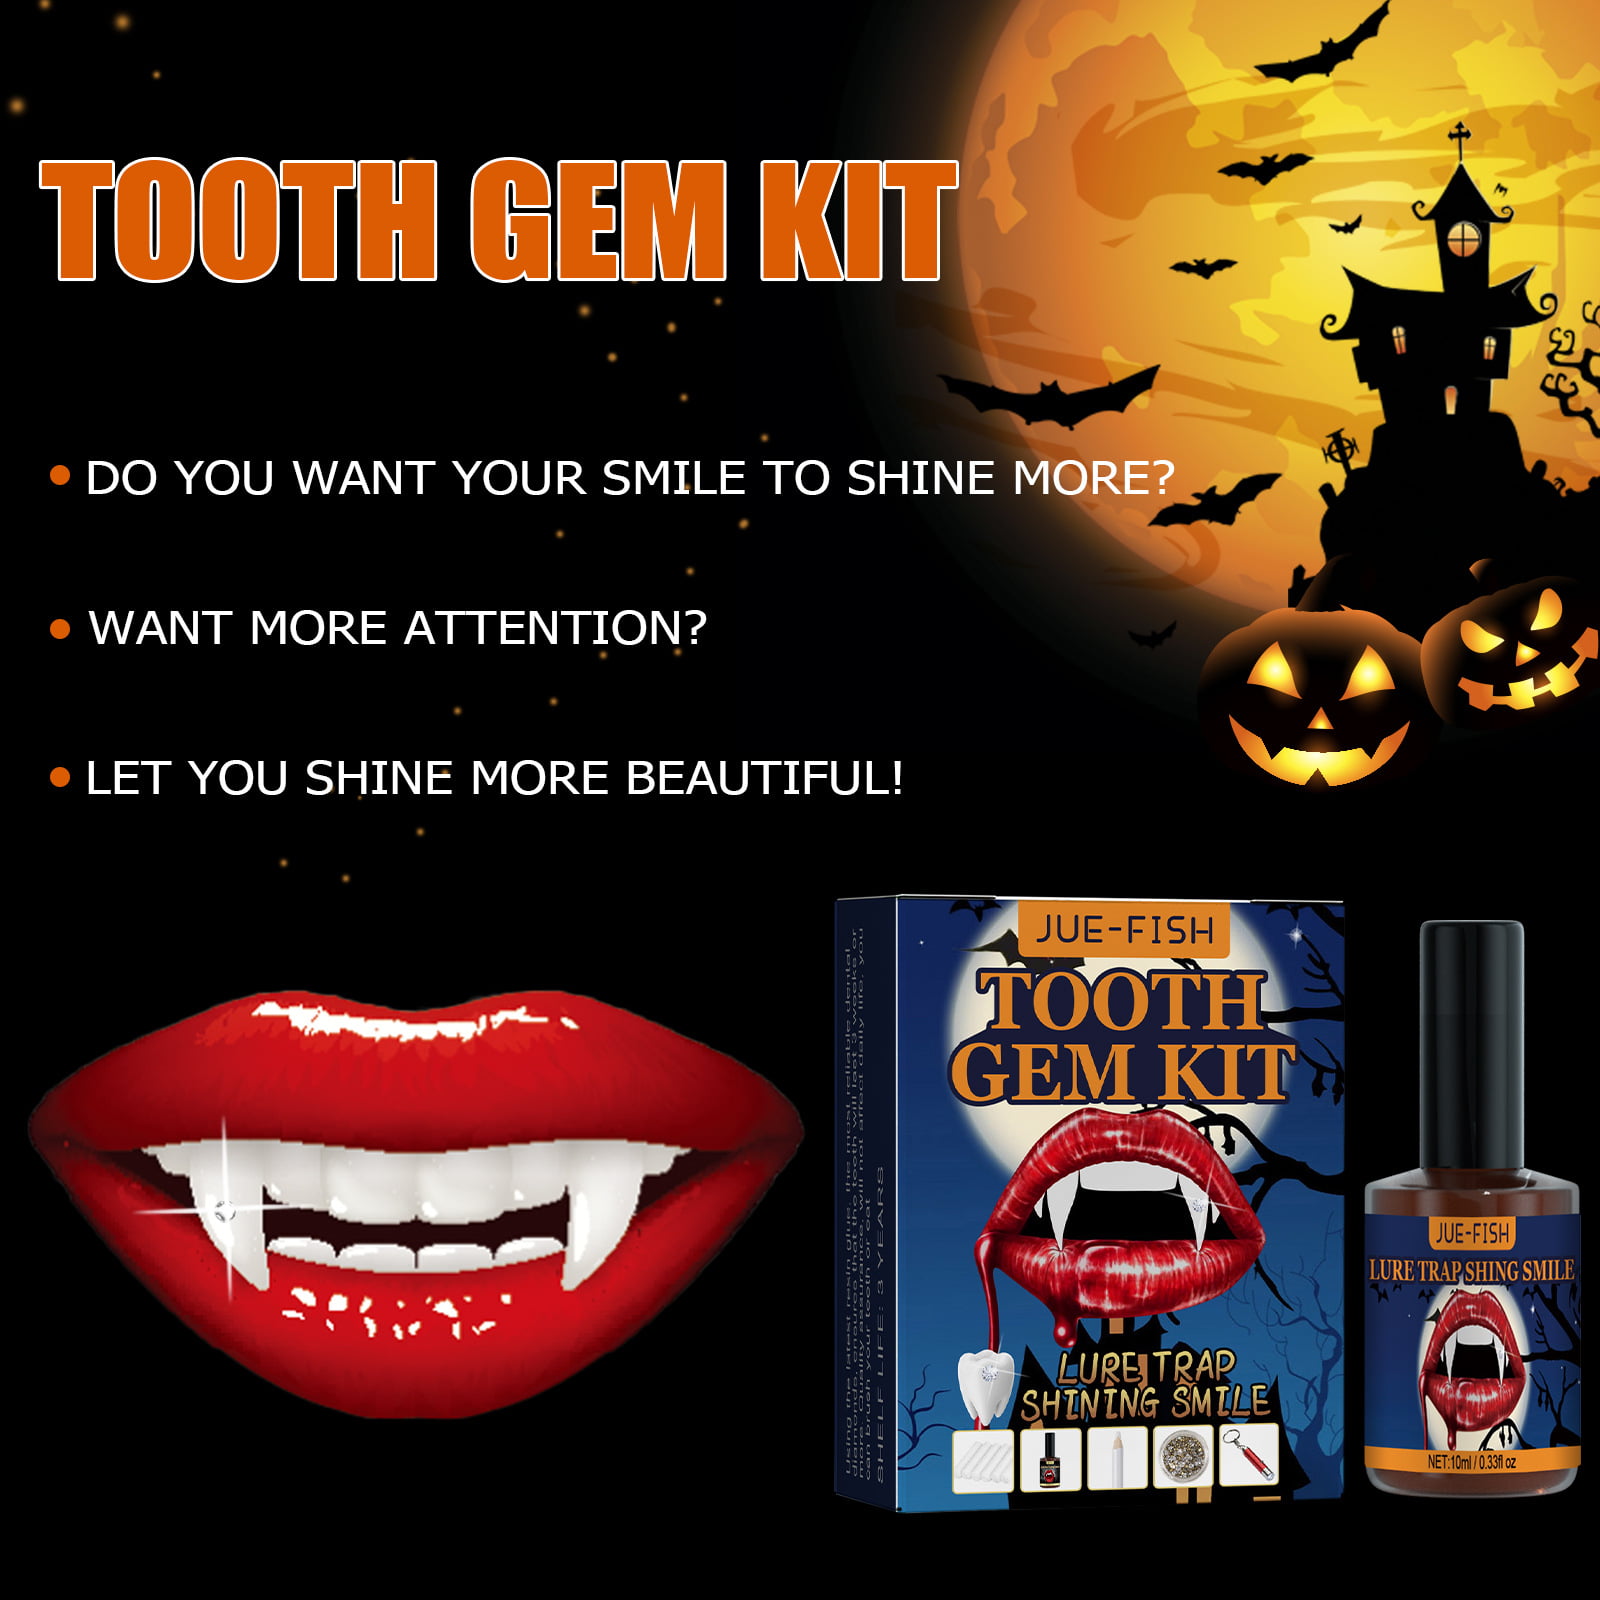 SDJMa Professional DIY Halloween Tooth Gem Kit with Curing Light